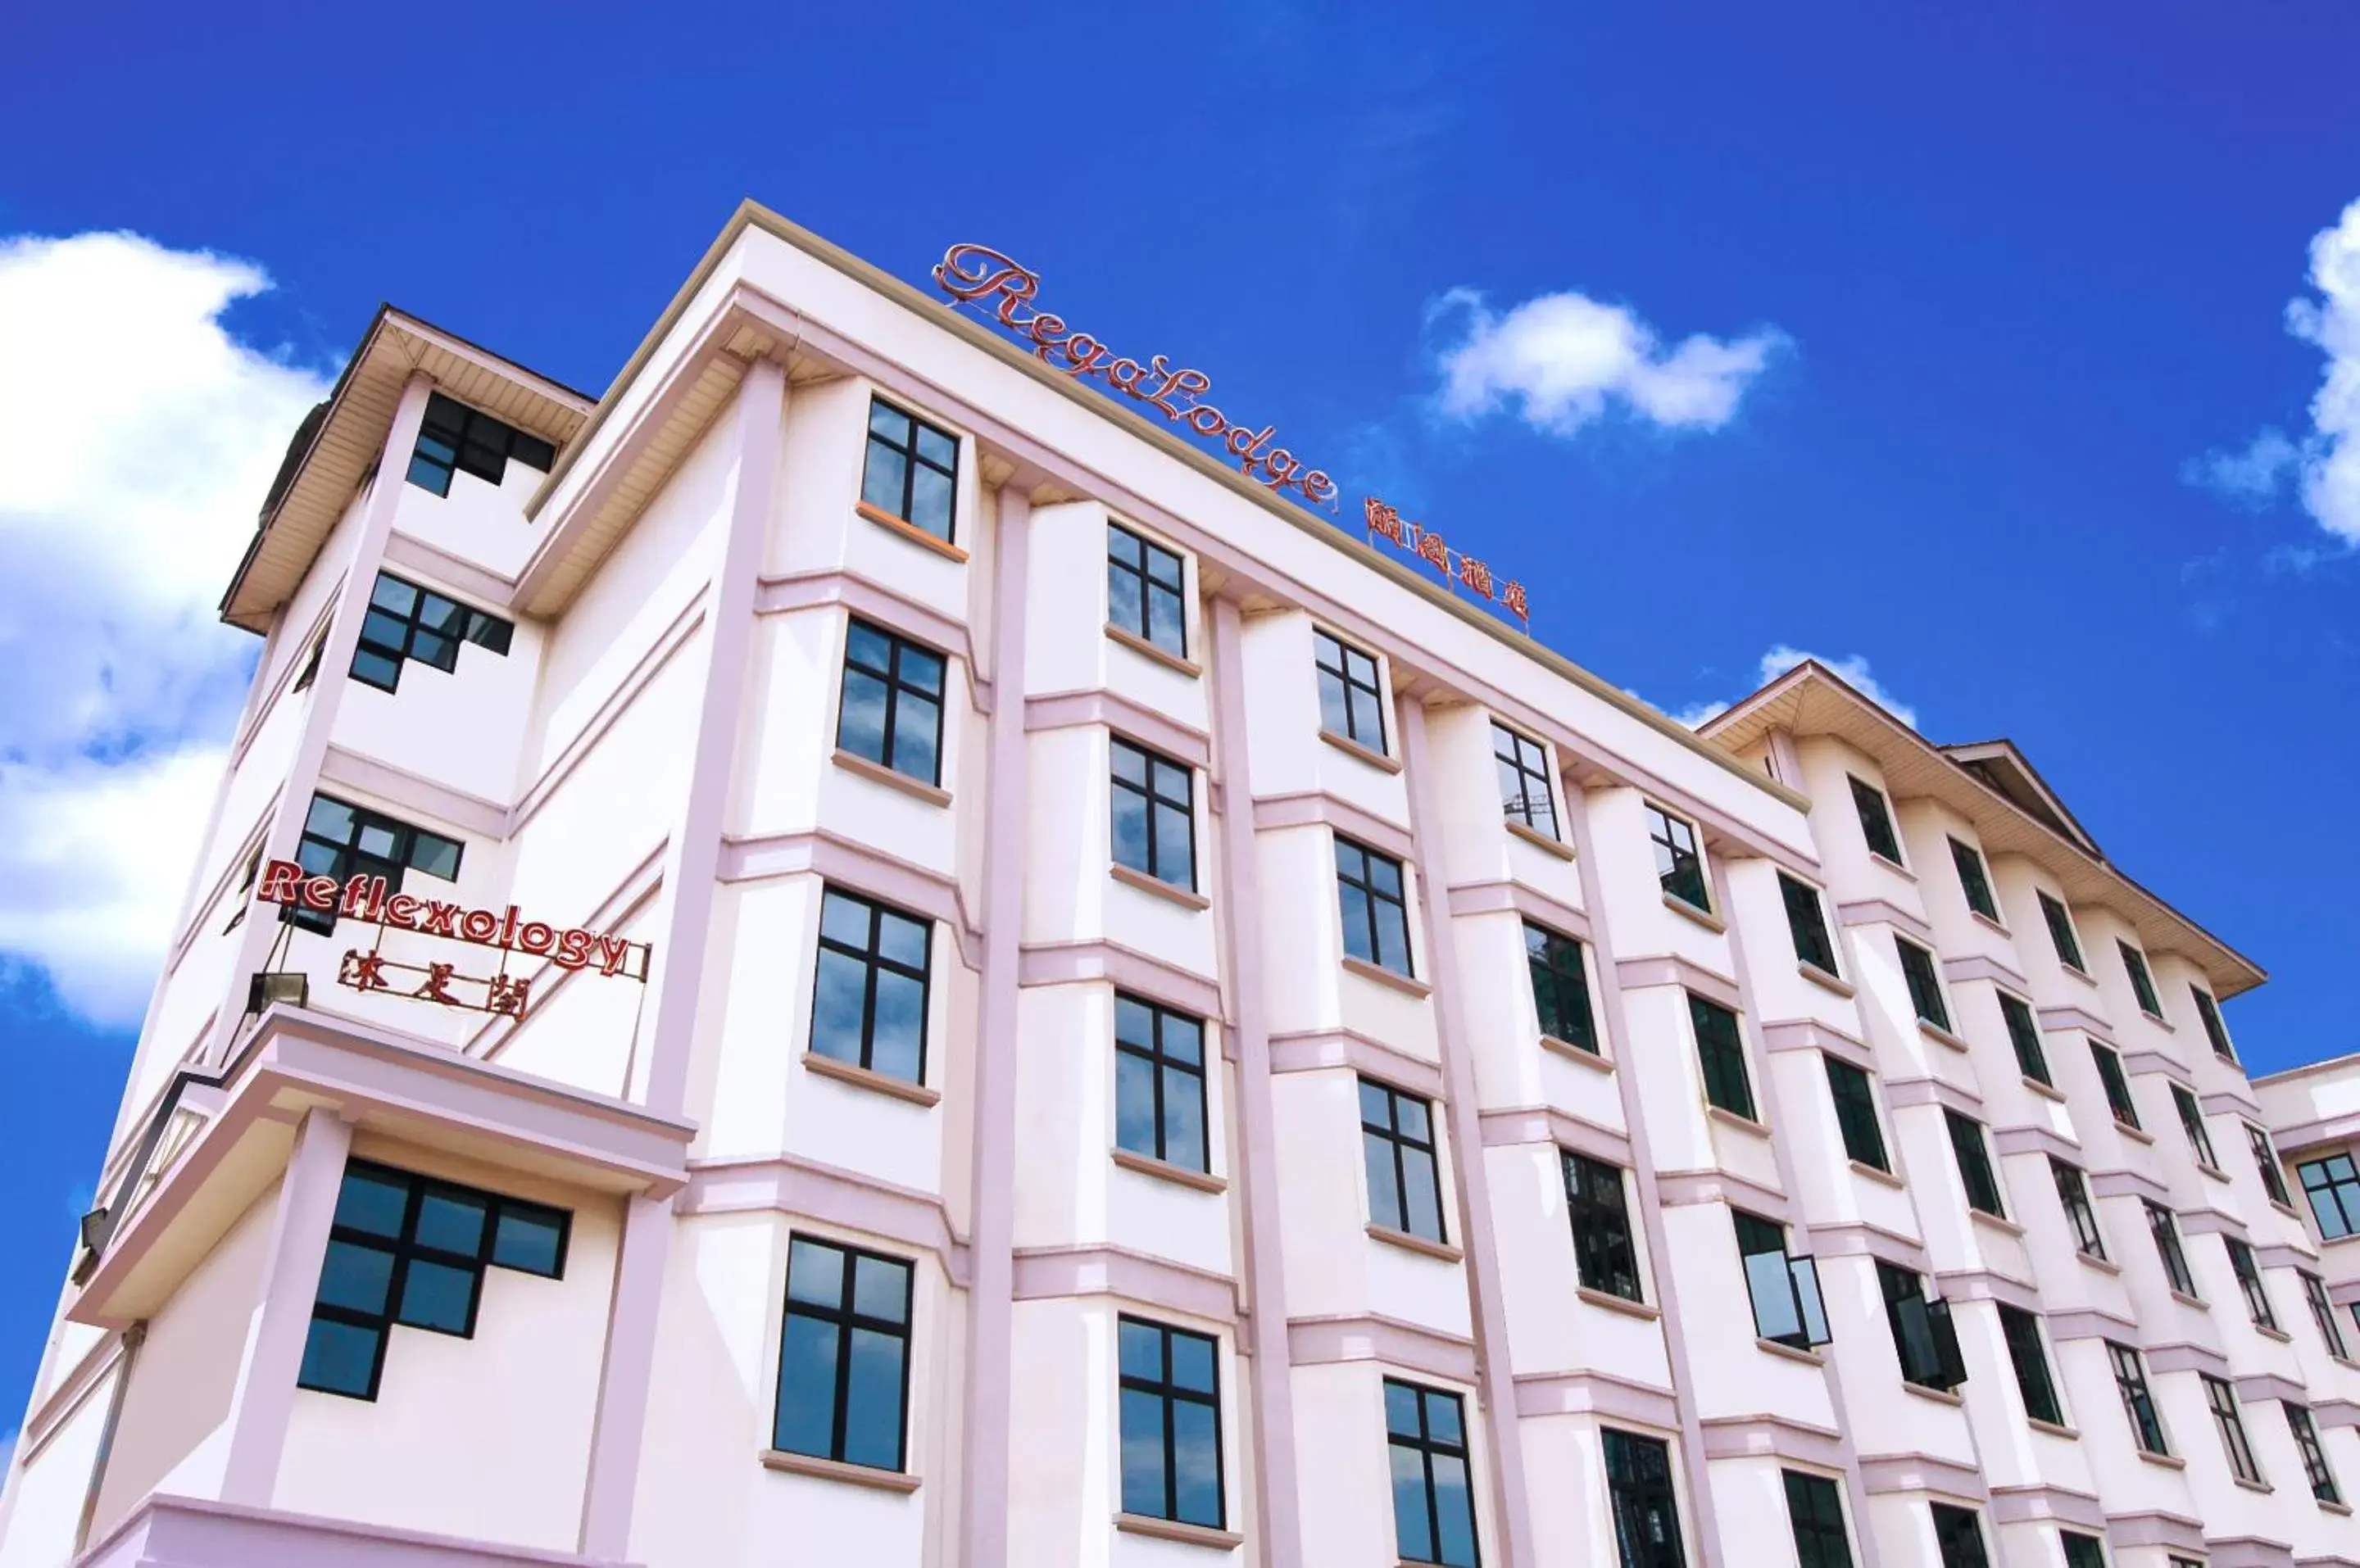 Day, Property Building in Regalodge Hotel Ipoh